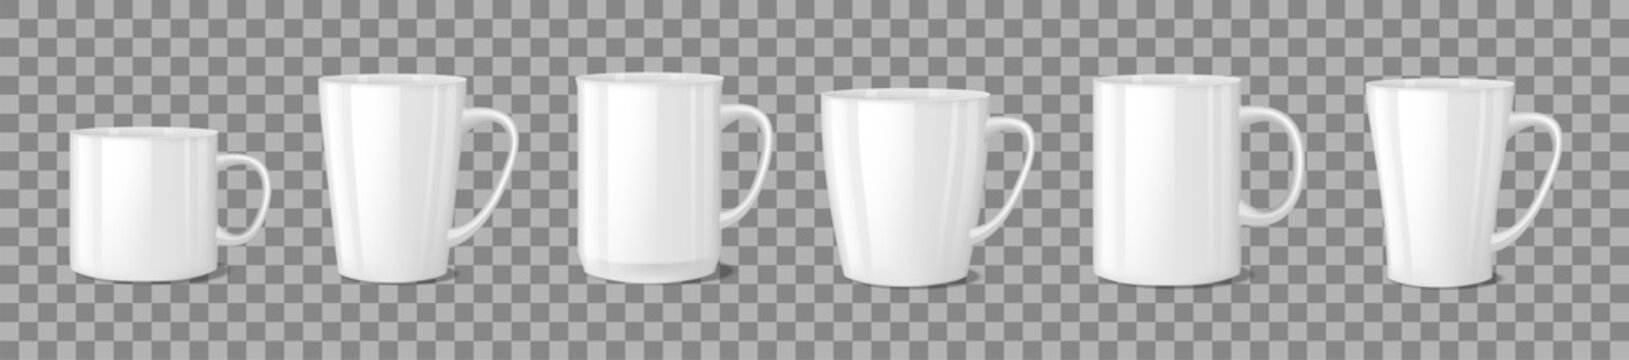 Realistic blank white coffee mug cups on transparent background. Cup template mockup isolated. teacup for breakfast. Vector illustration